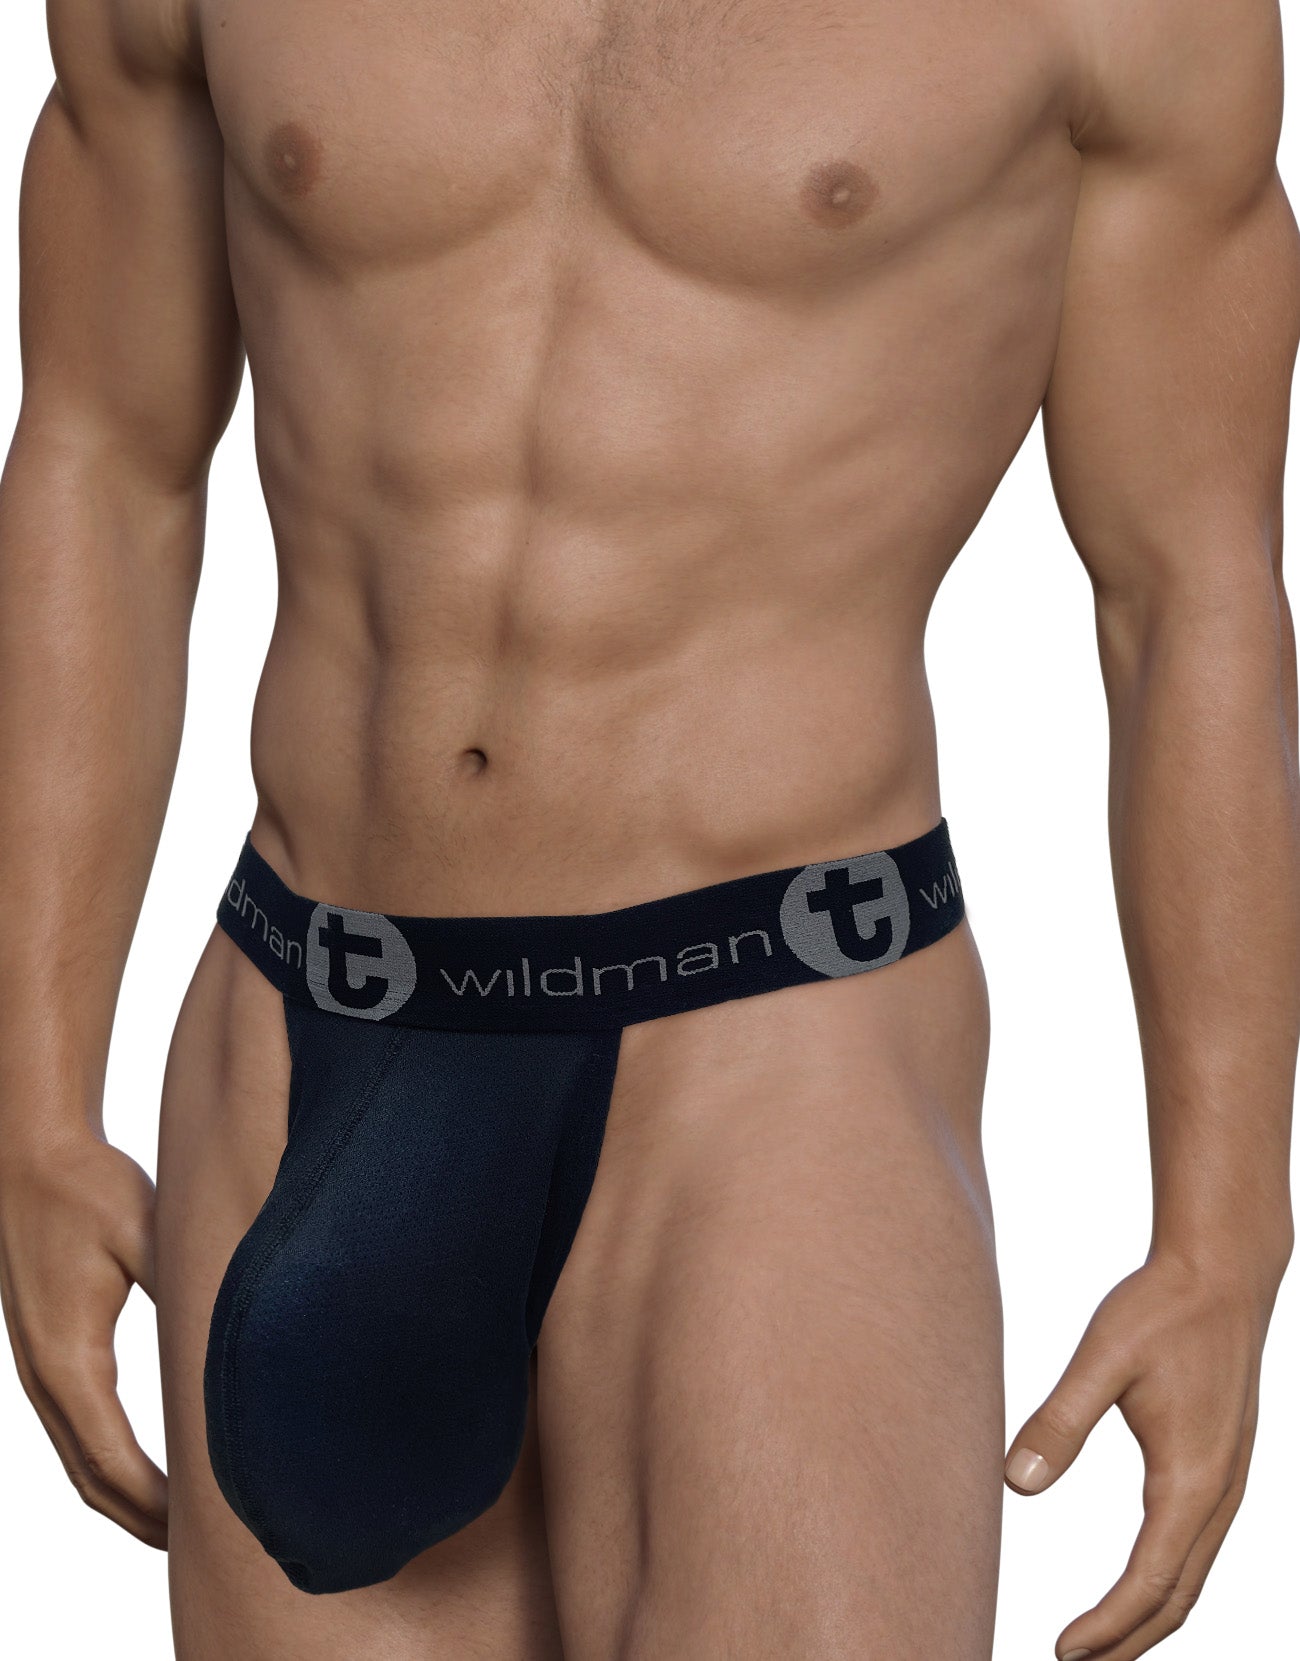 WildmanT Mesh Monster Cock Strapless Pouch Black - DealByEthan.gay